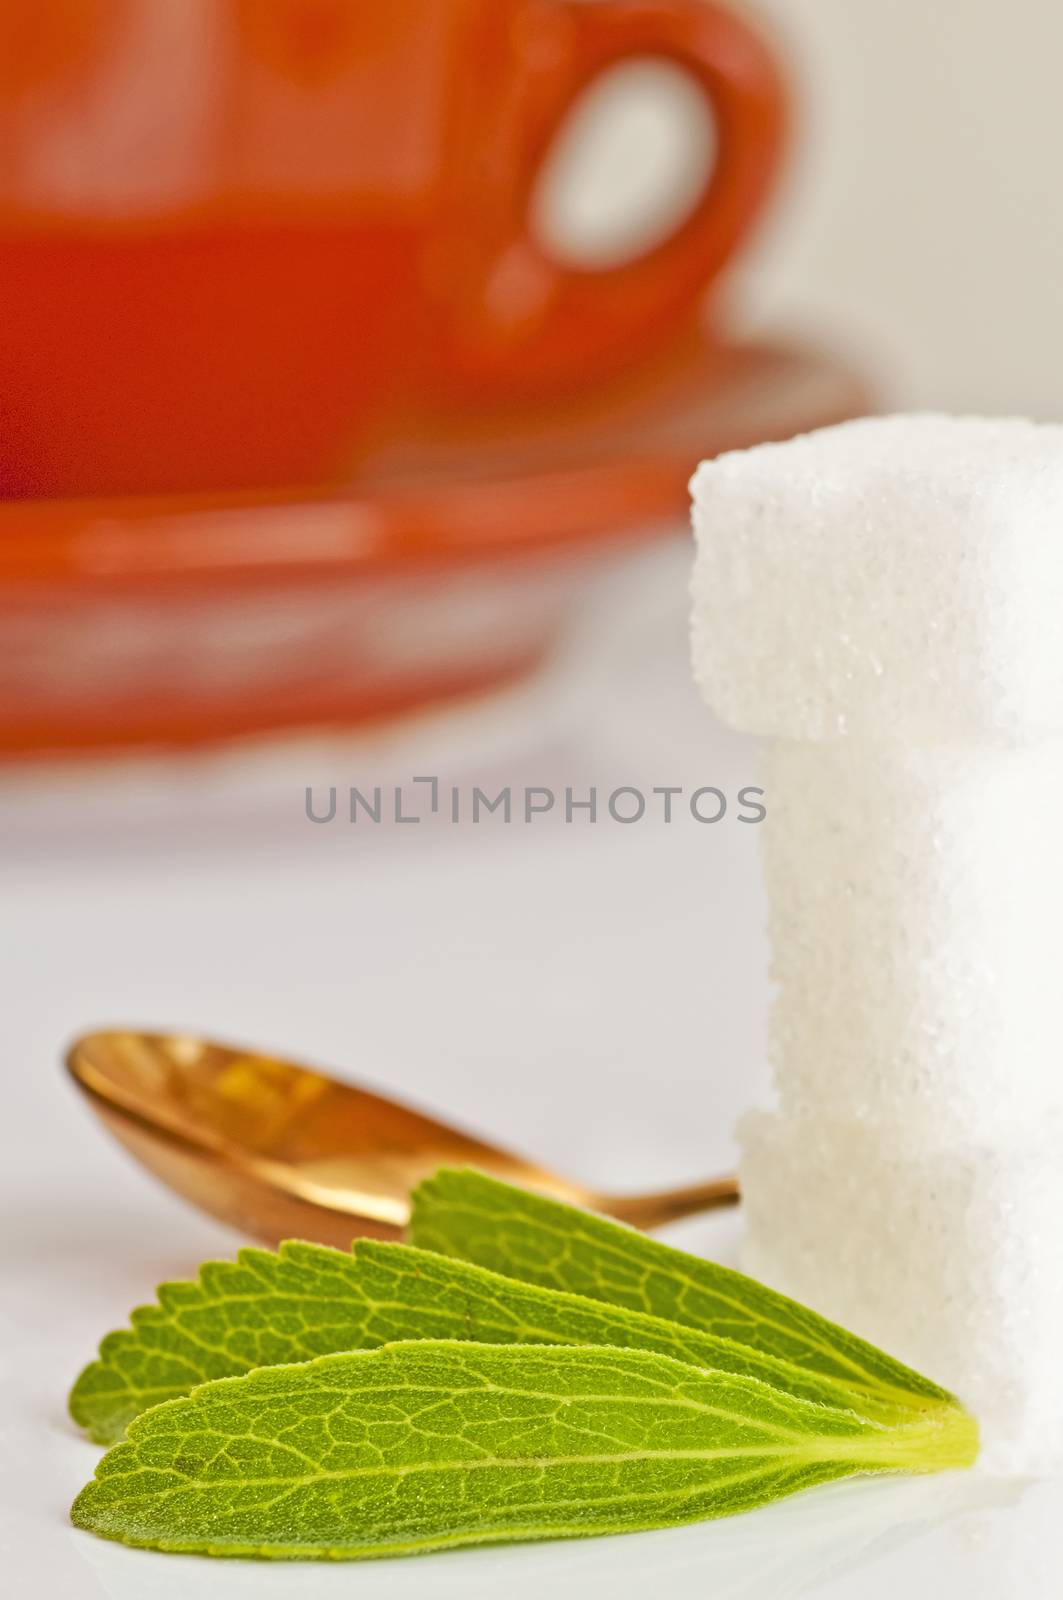 Stevia rebaudiana the herbal support for sugar